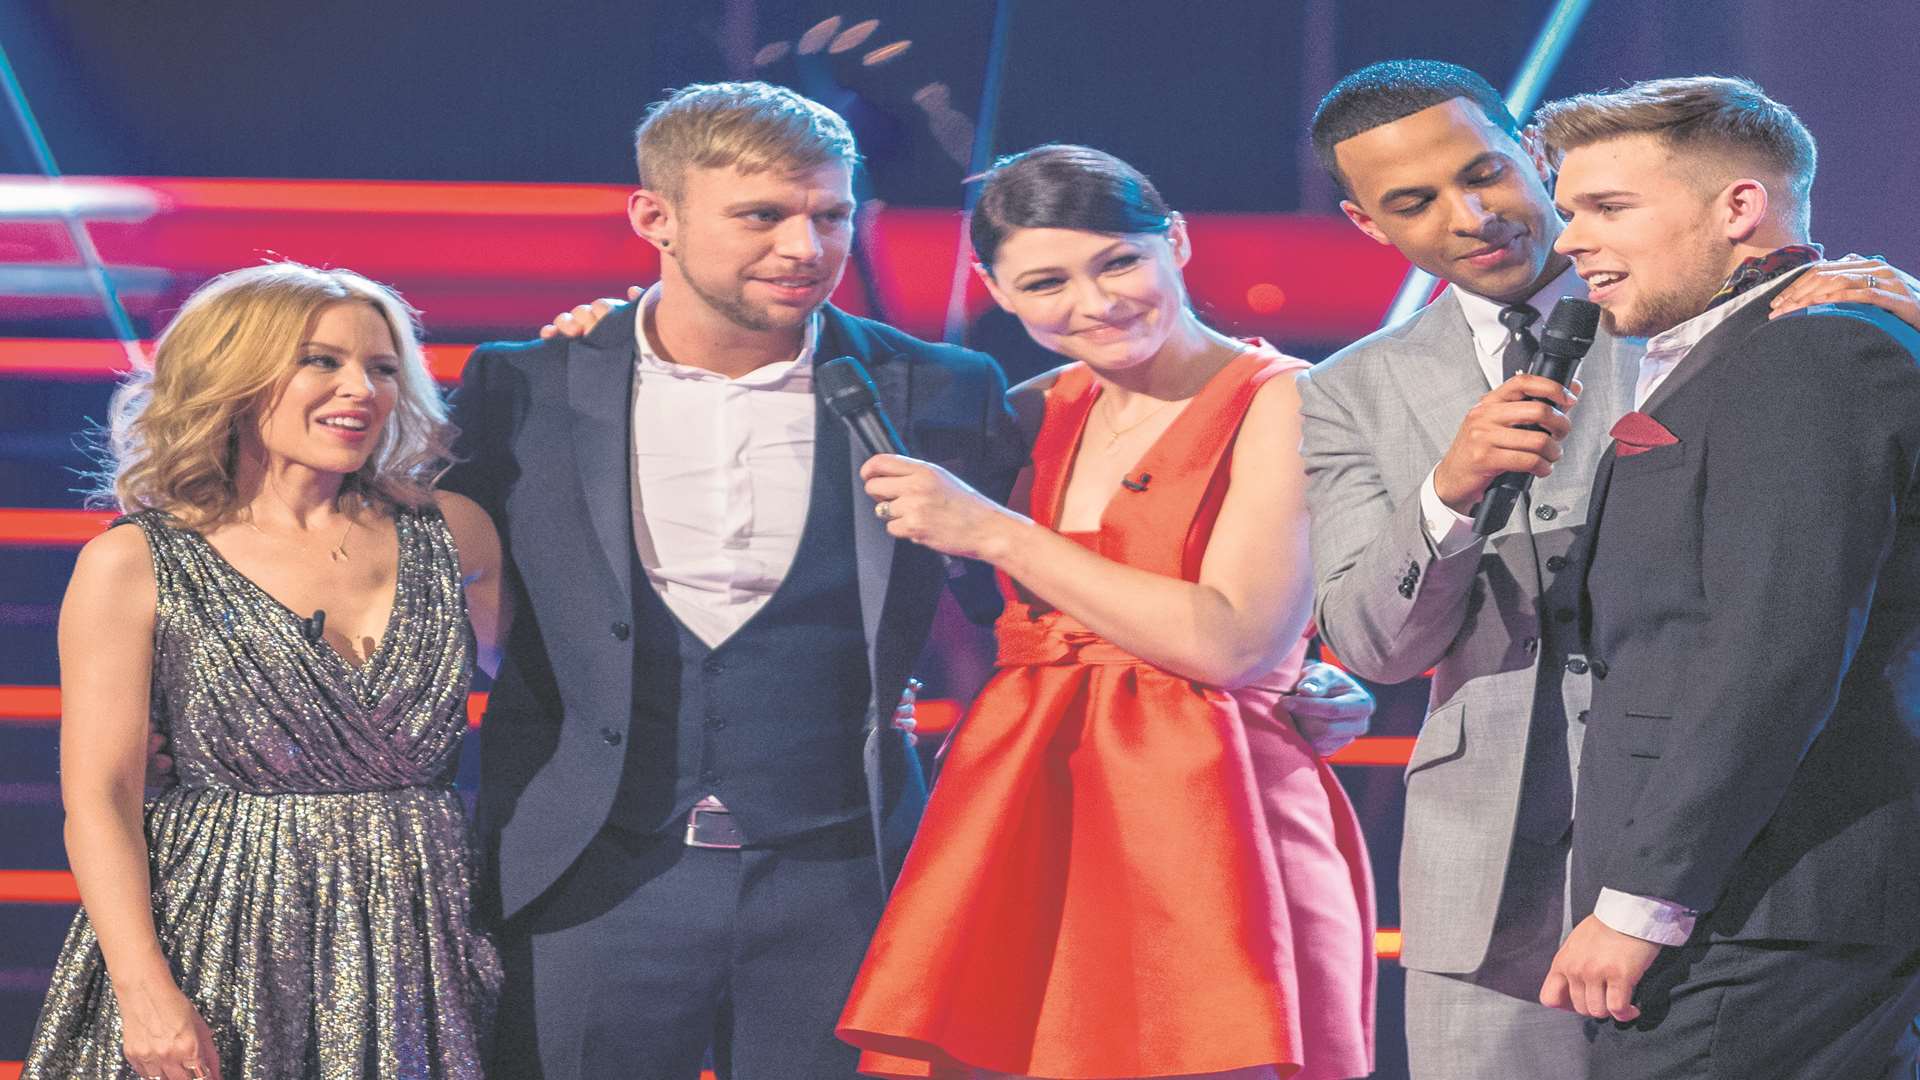 Marvin, fourth from left, on BBC's The Voice